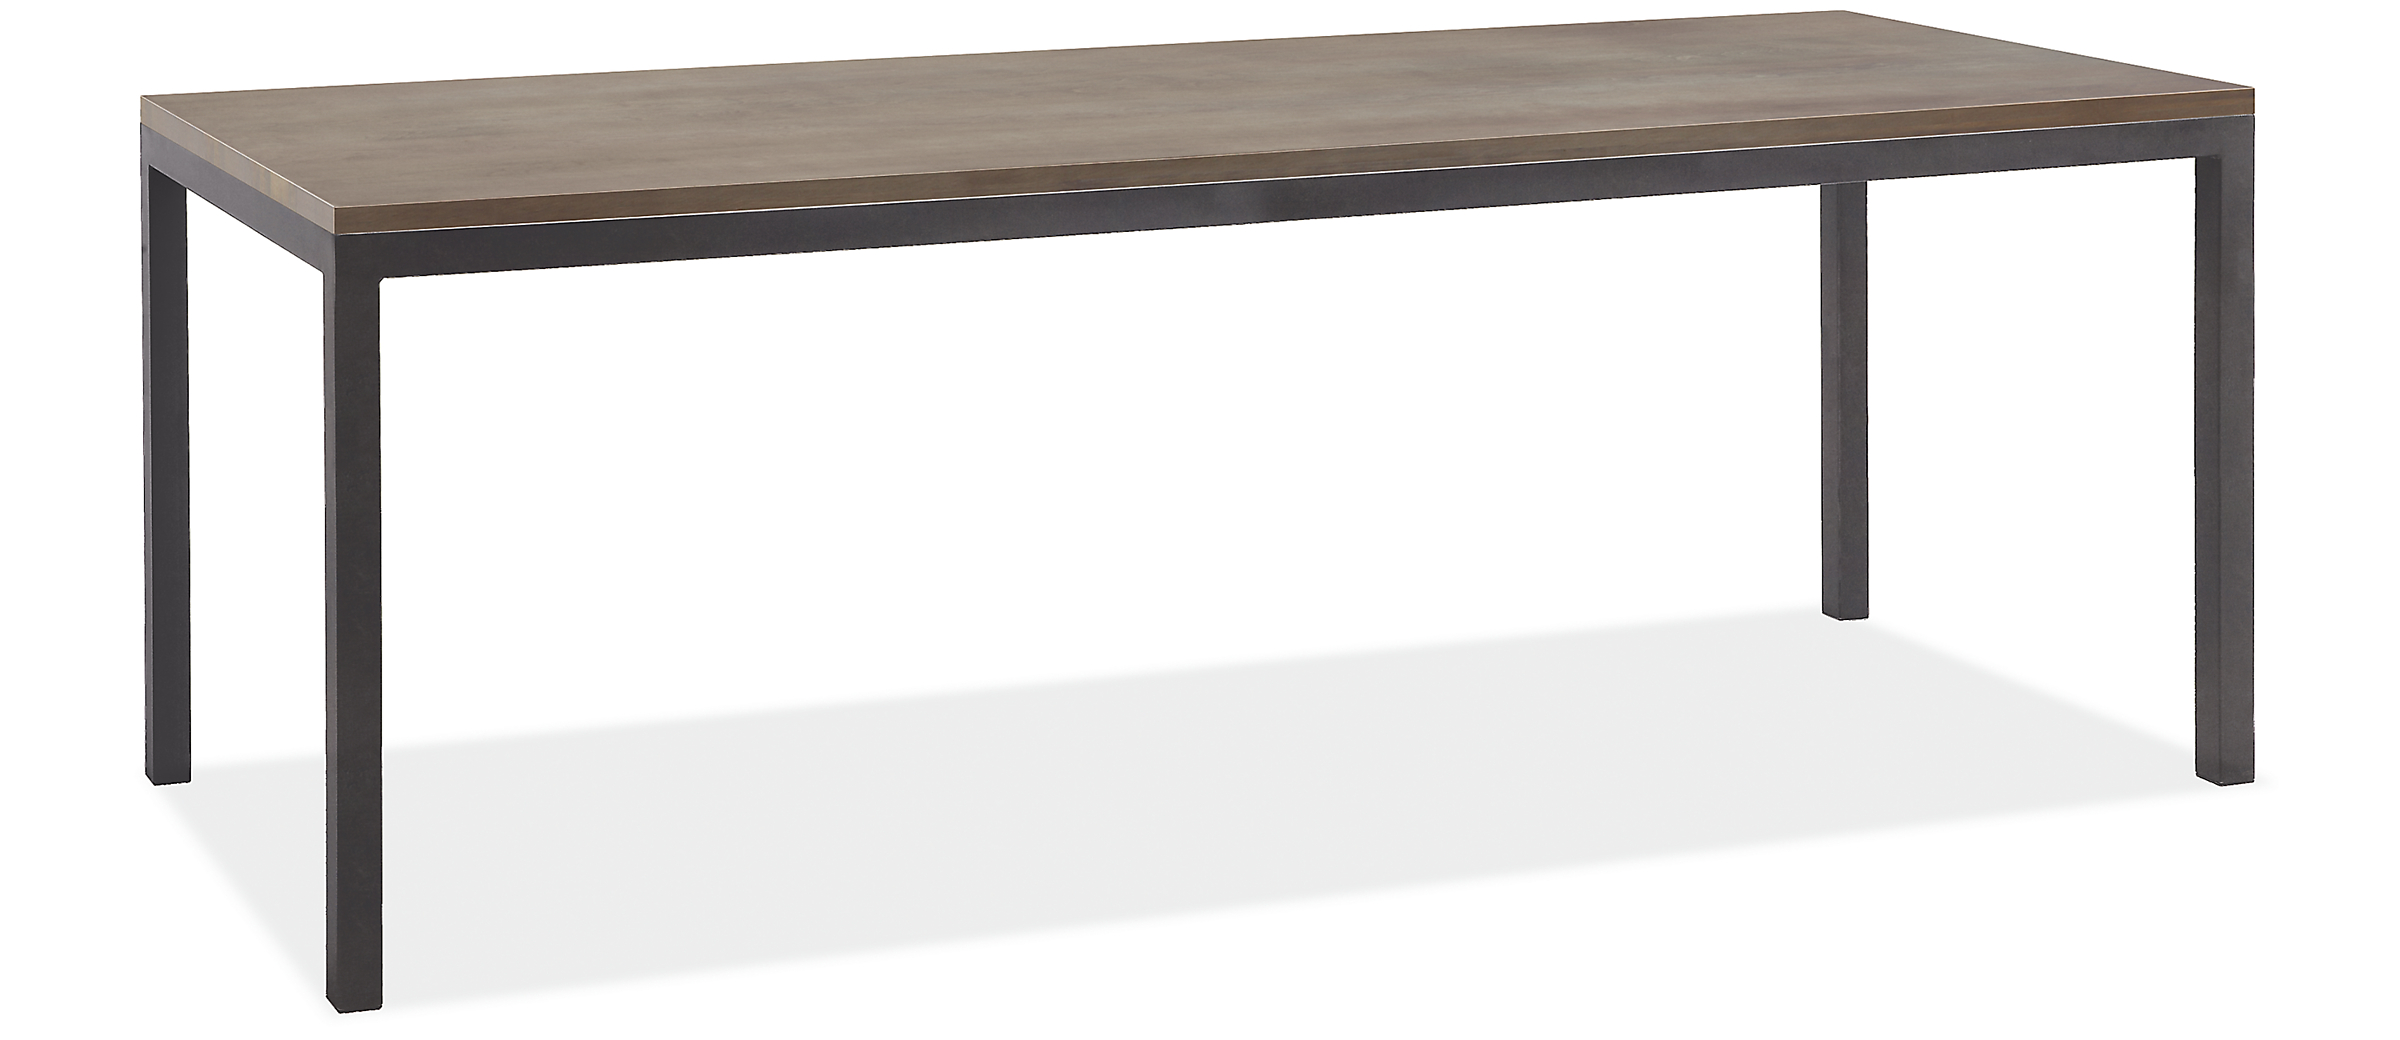 Parsons 96w 34d 43h Counter Table in 2" Natural Steel with Shell Top